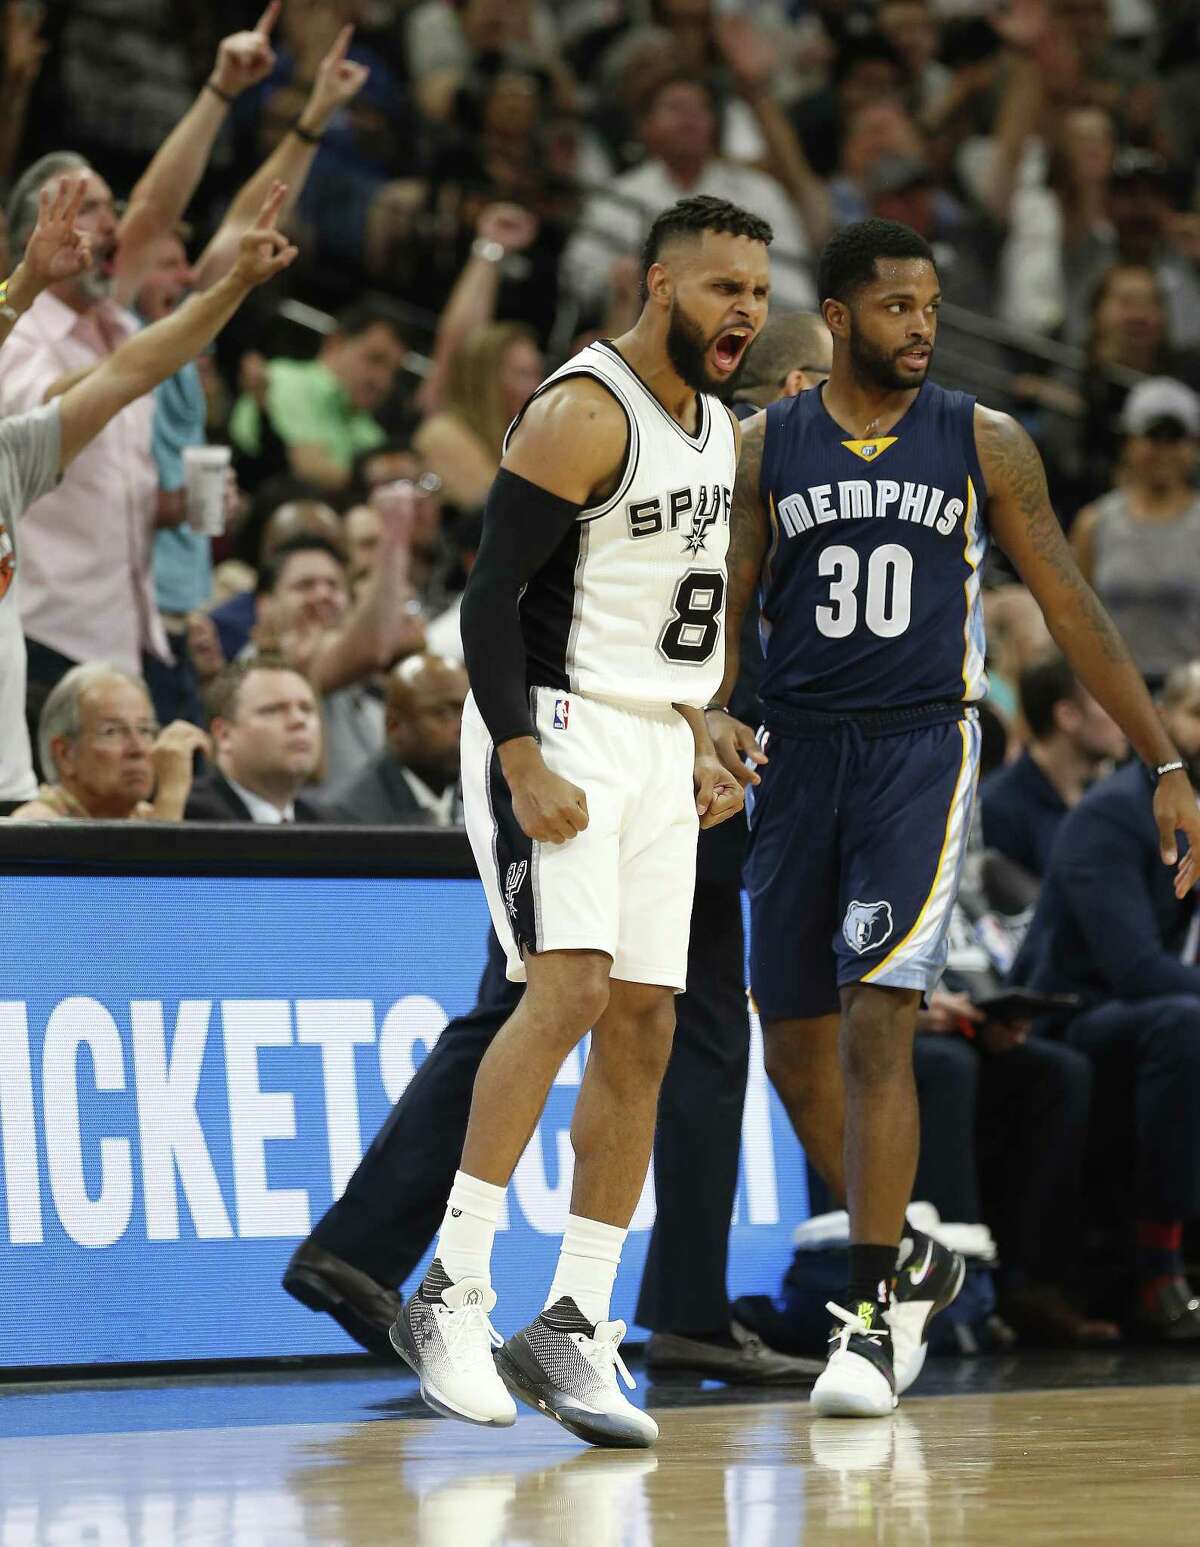 1. Bench Buckets The Spurs’ bench outscored Memphis’ 46-30.